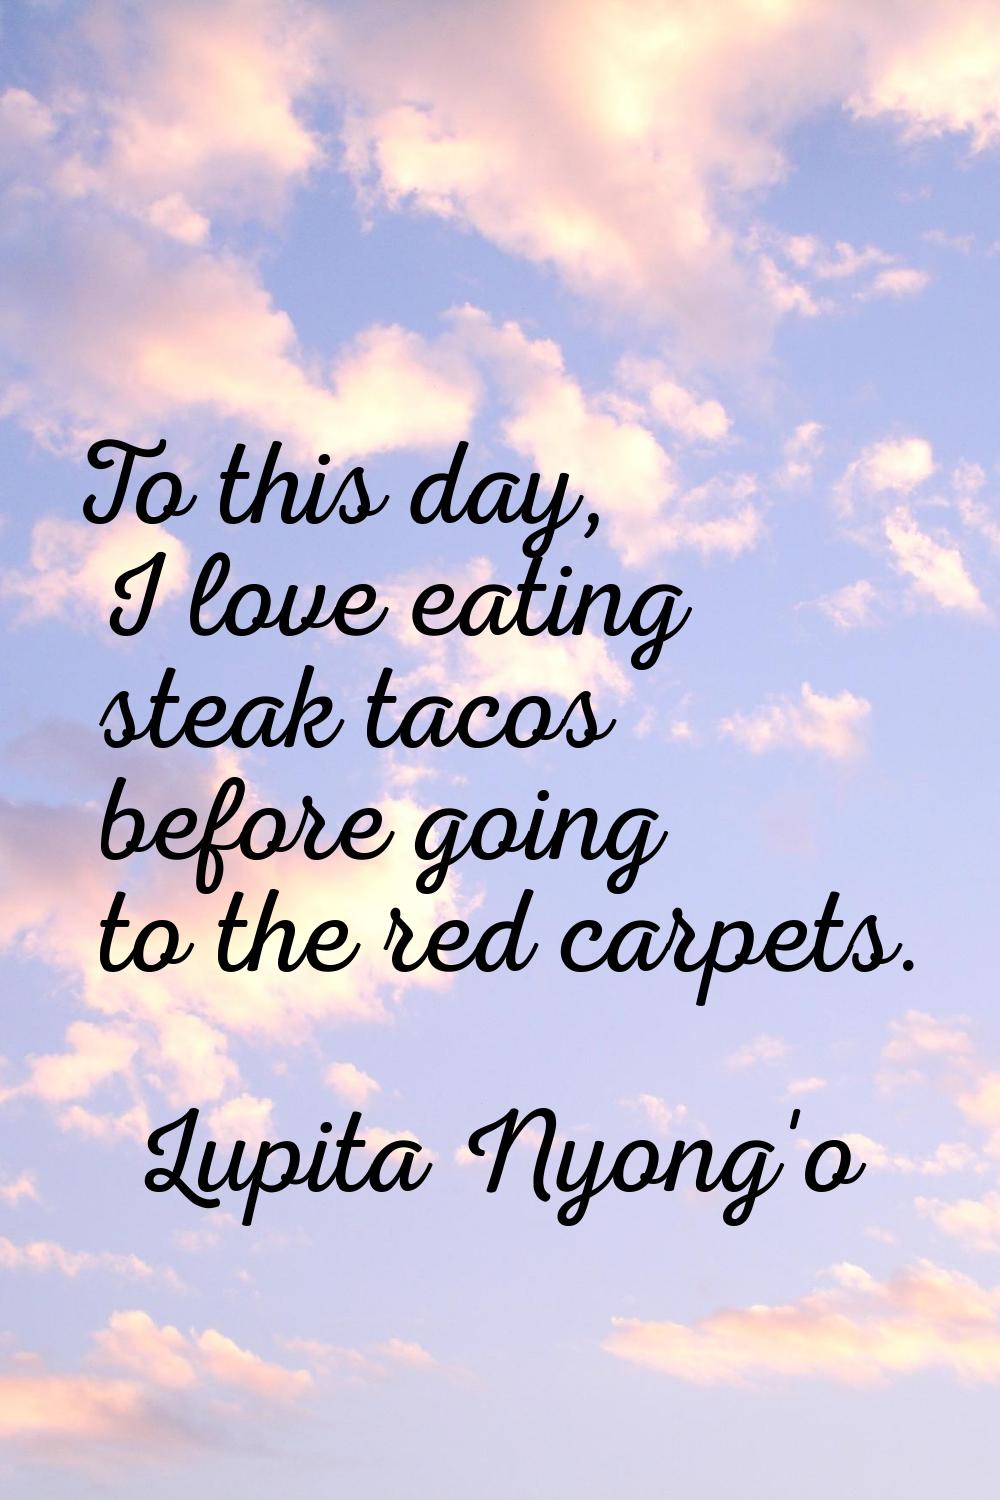 To this day, I love eating steak tacos before going to the red carpets.